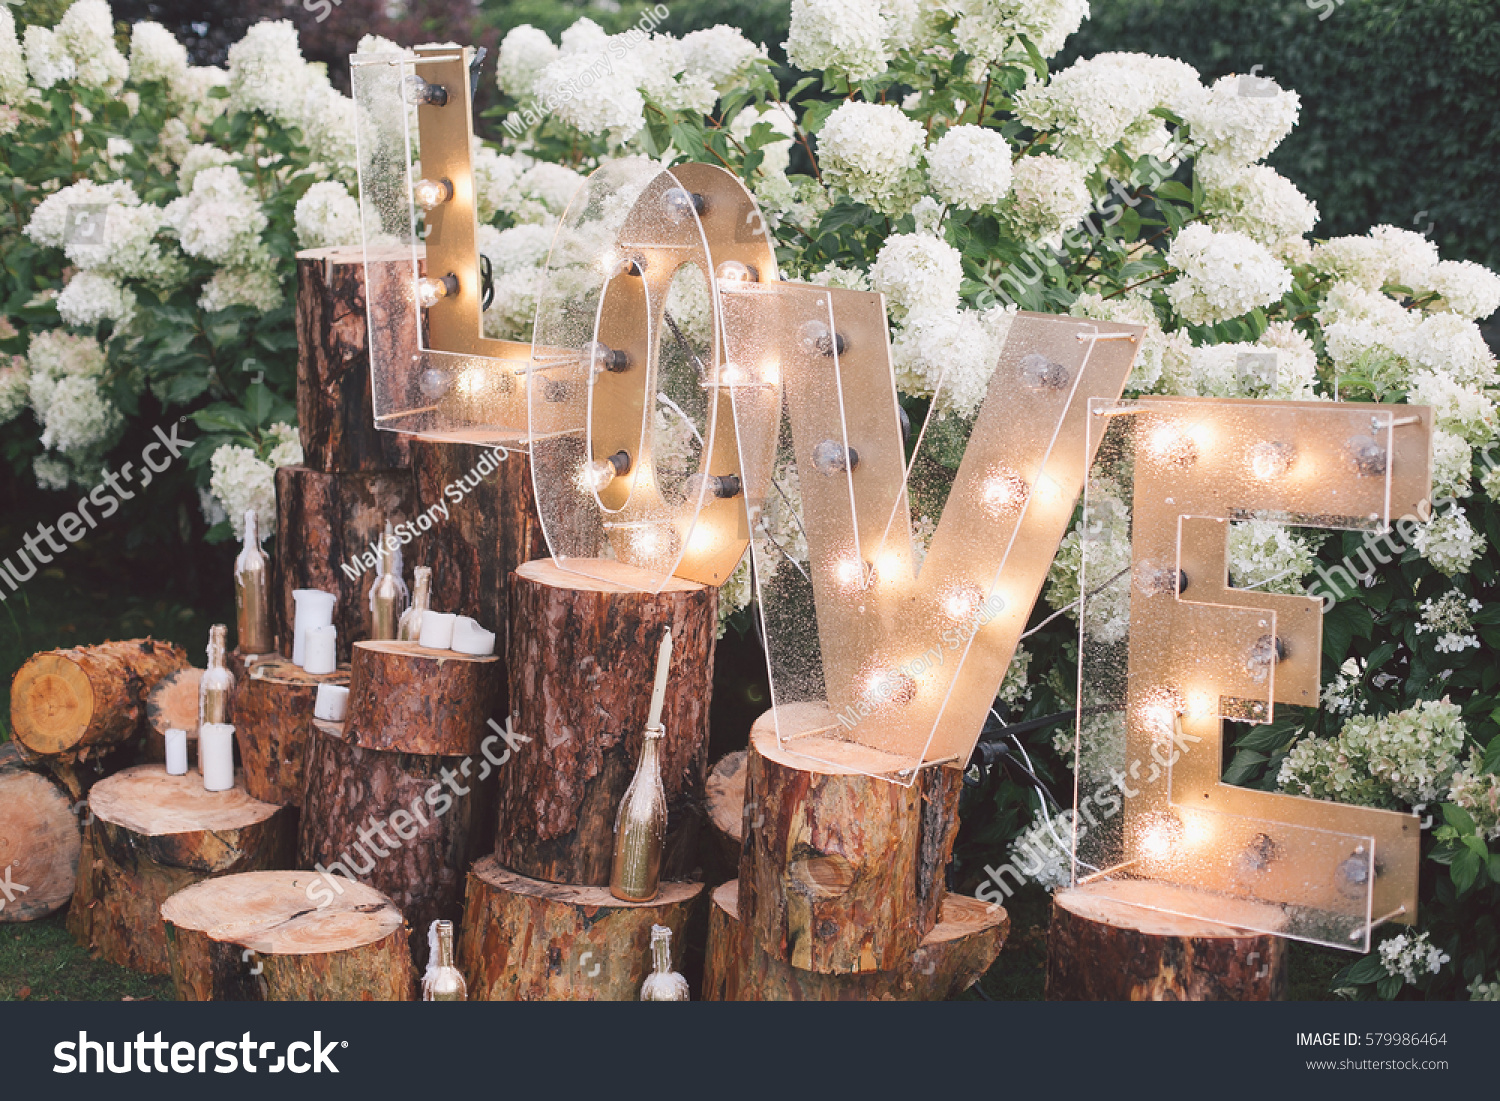 Decorated meadow for wedding ceremony. #579986464